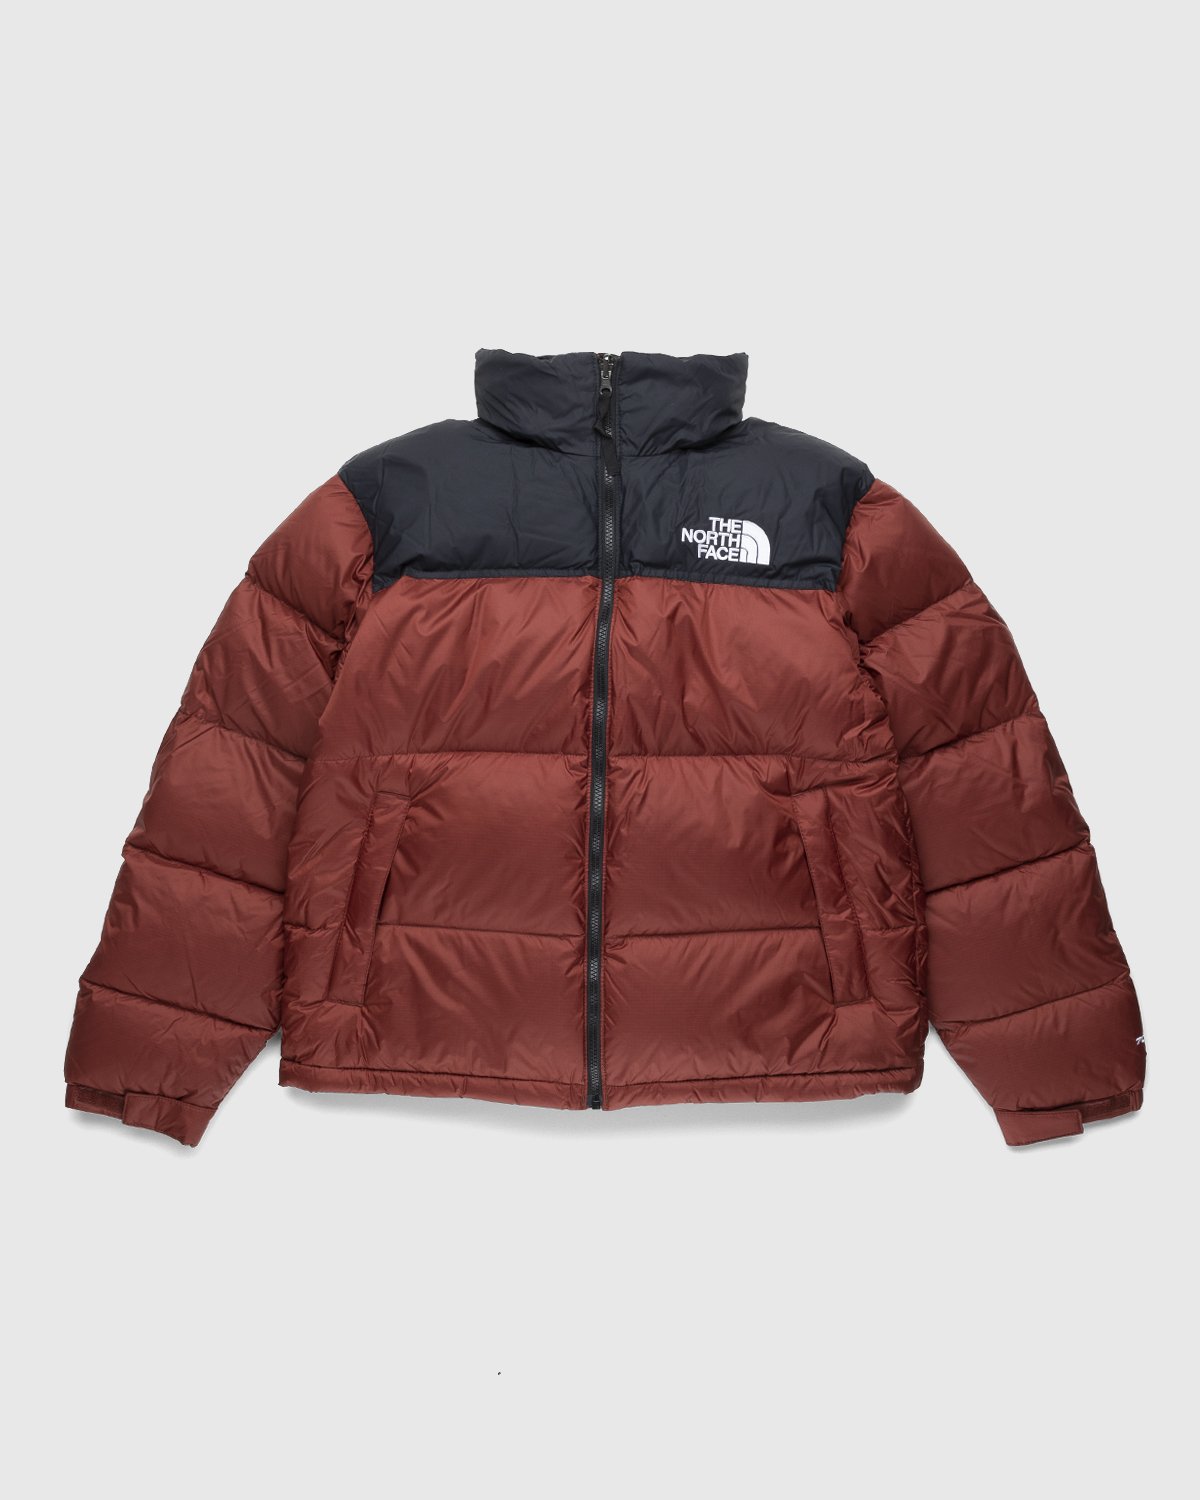 The North Face - 1996 Retro Nuptse Jacket Brick House Red - Clothing - Red - Image 1